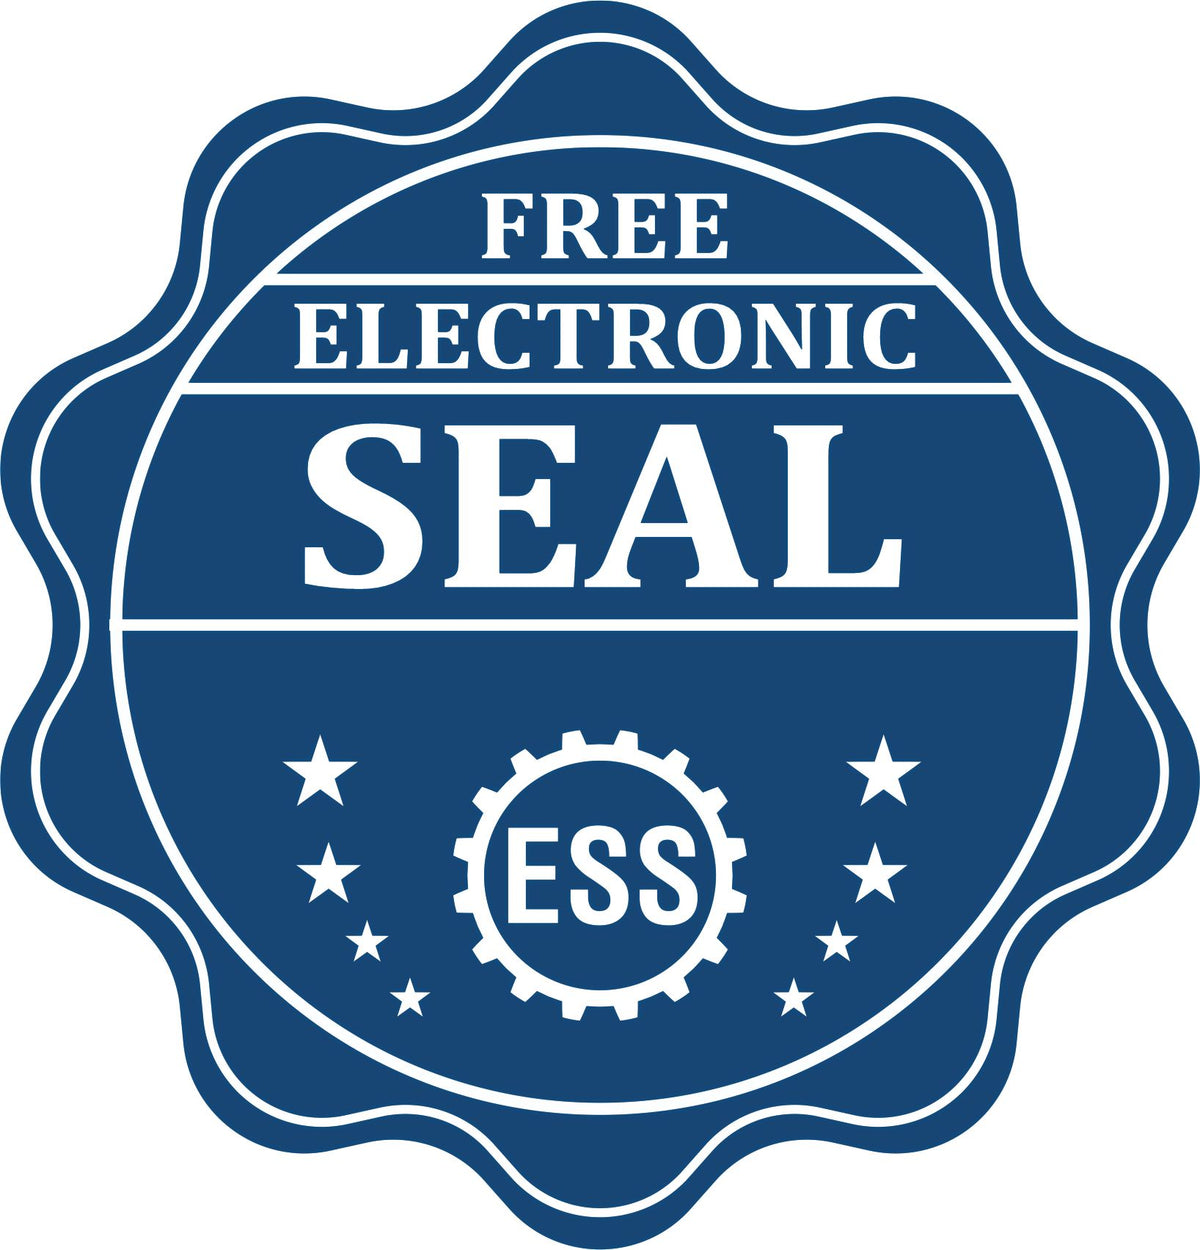 A badge showing a free electronic seal for the PSI Mississippi Notary Stamp with stars and the ESS gear on the emblem.